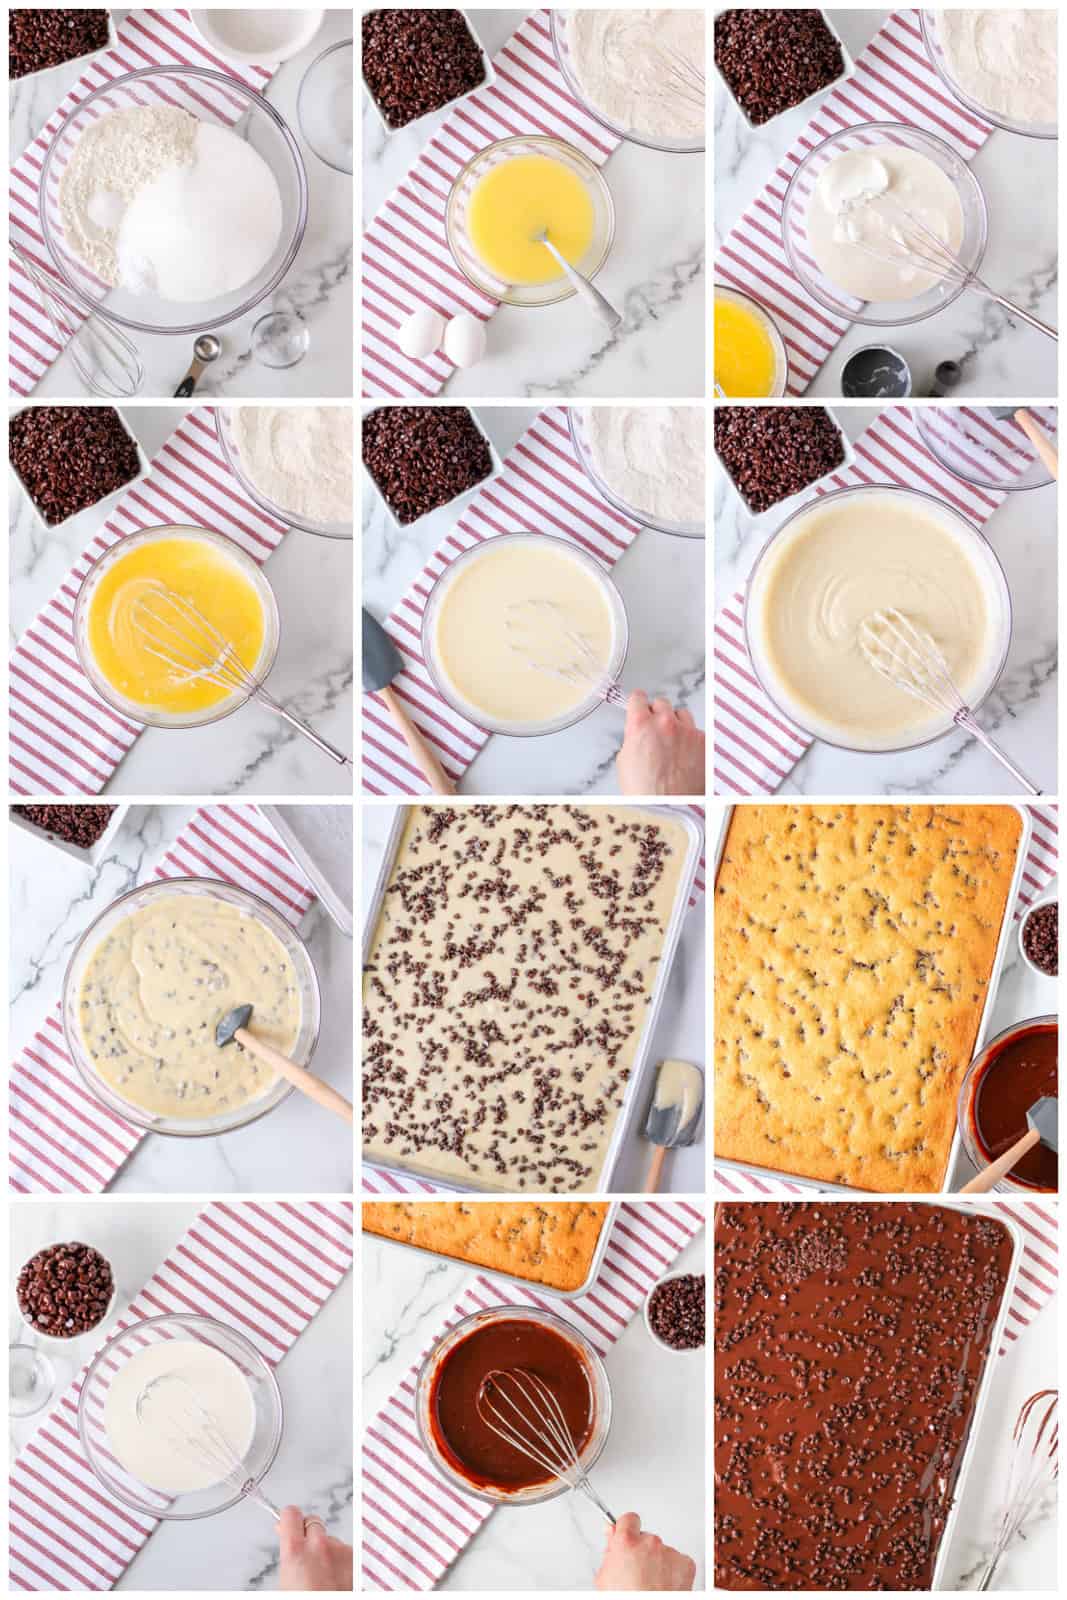 Step by step photos on how to make a Chocolate Chip Cake.